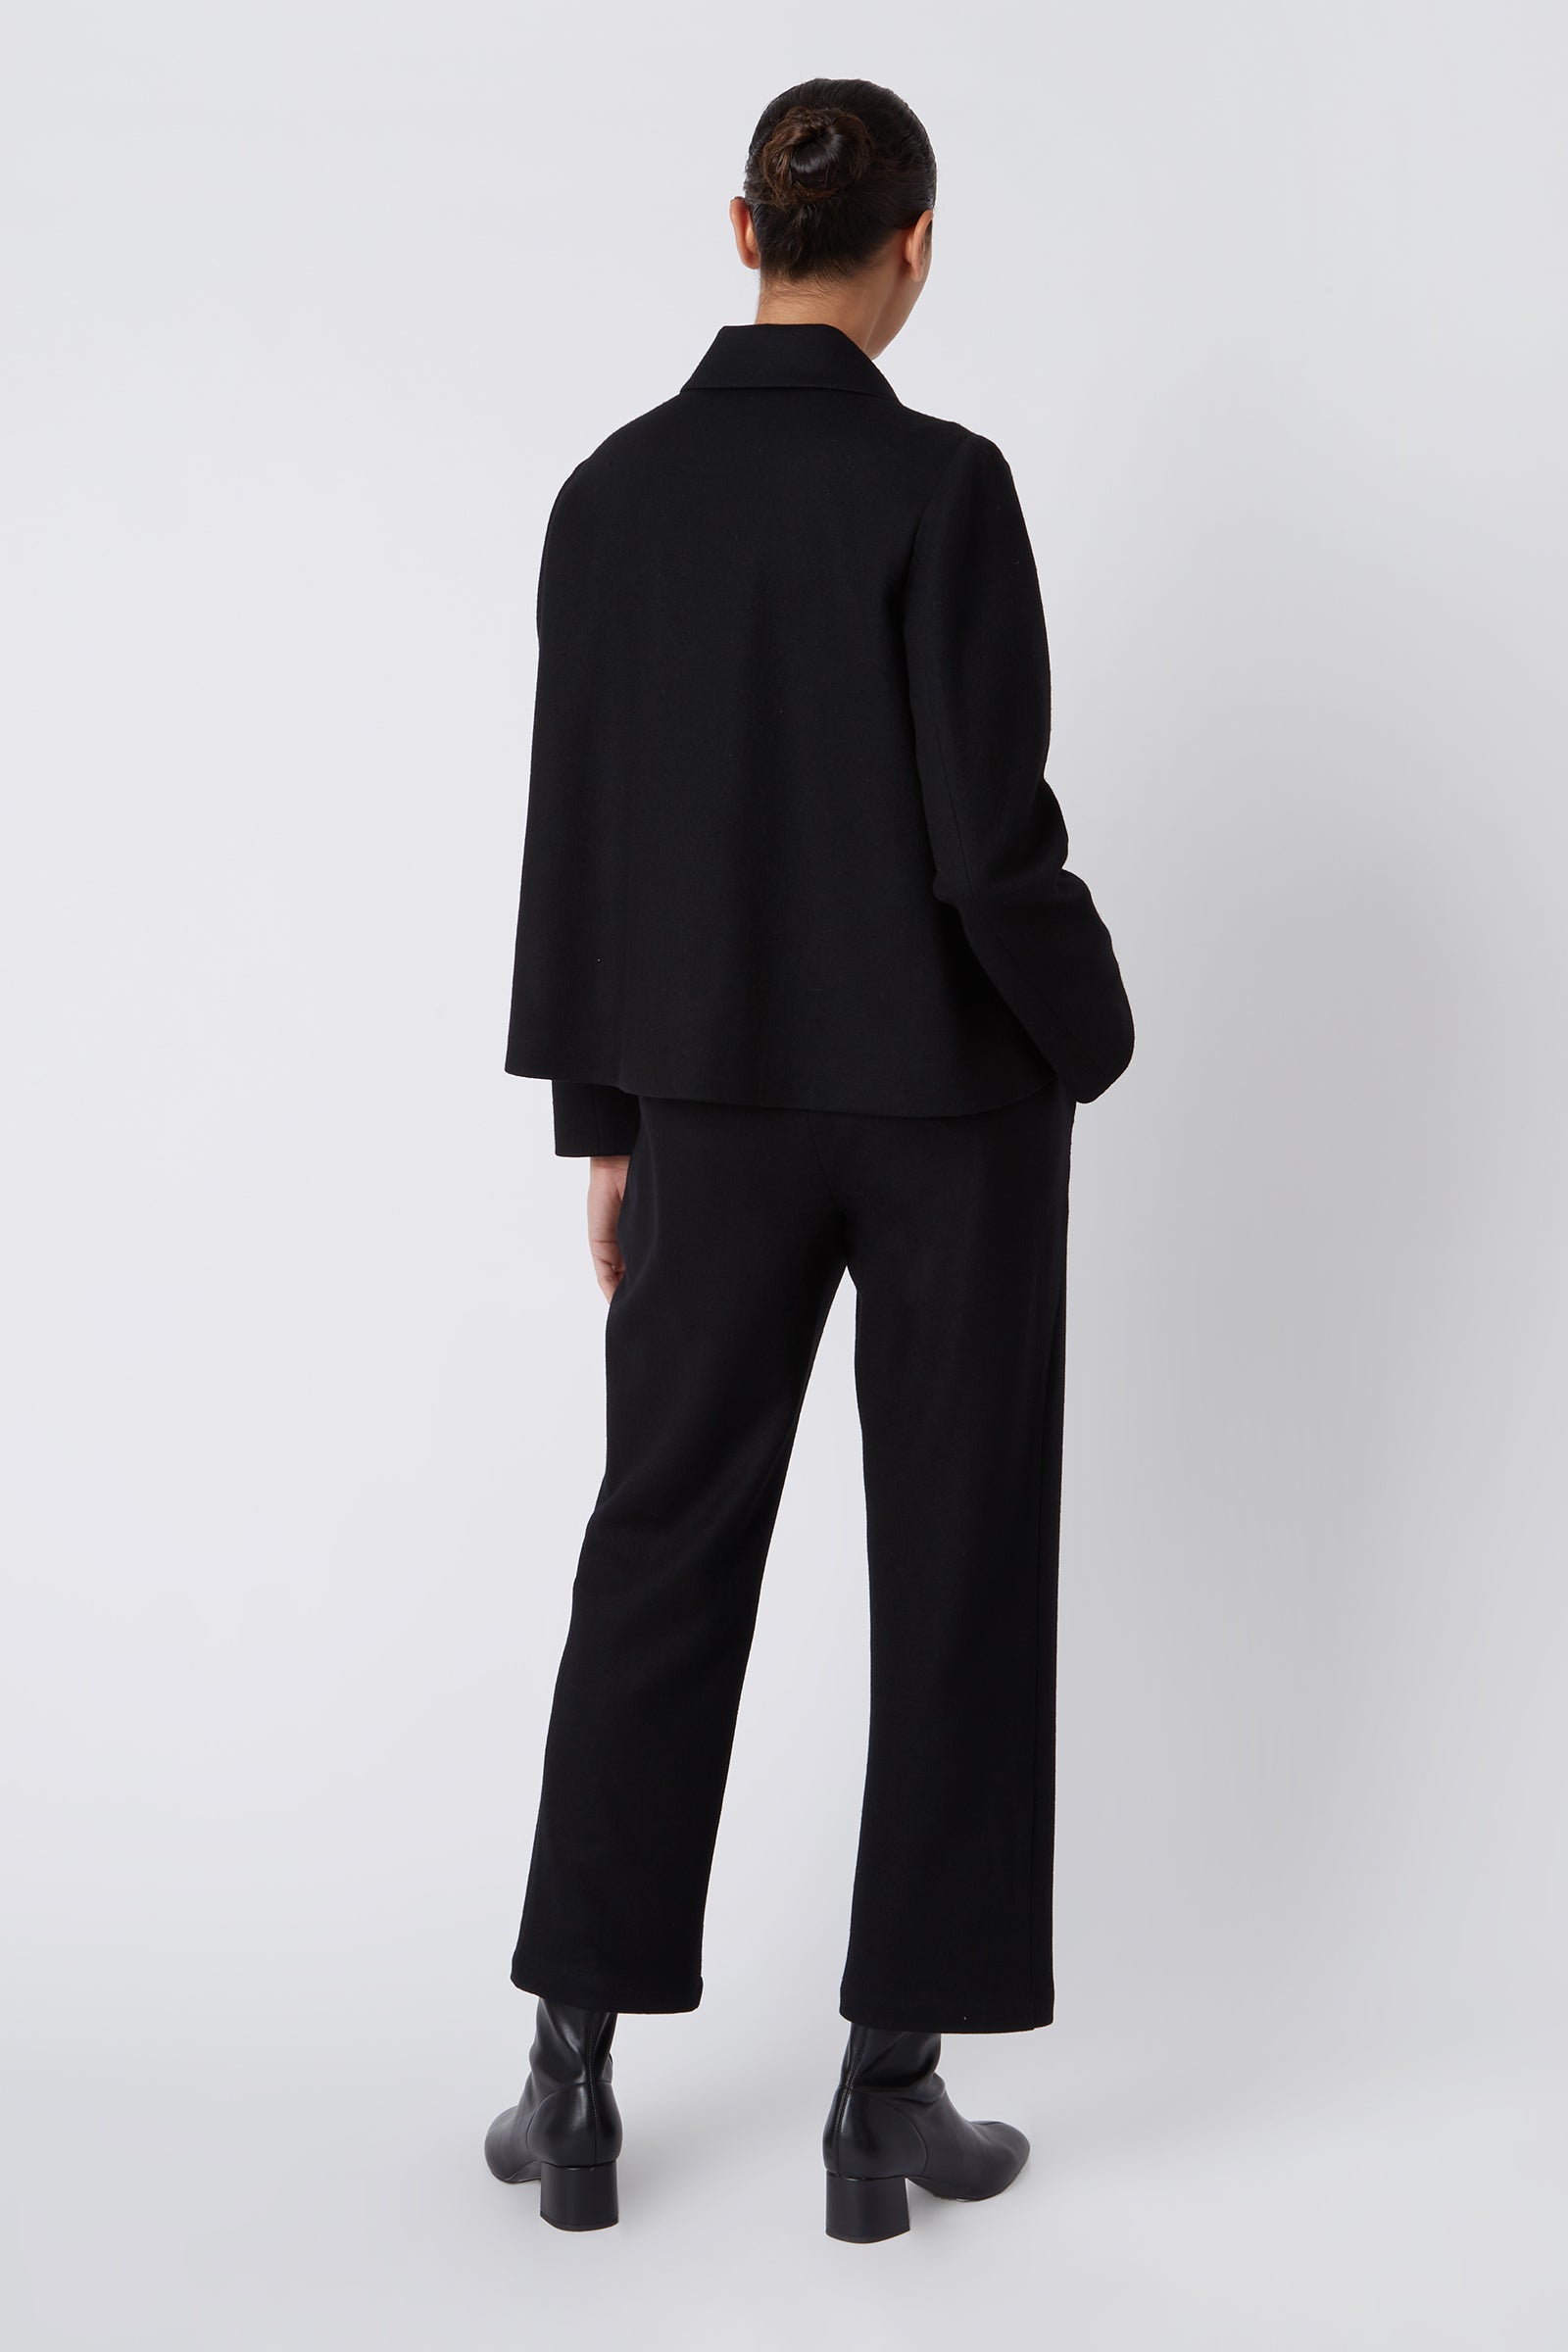 Kal Rieman Sylvie FJ Swing Jacket in Black Felted Jersey on Model with Hands in Pockets Cropped Front View